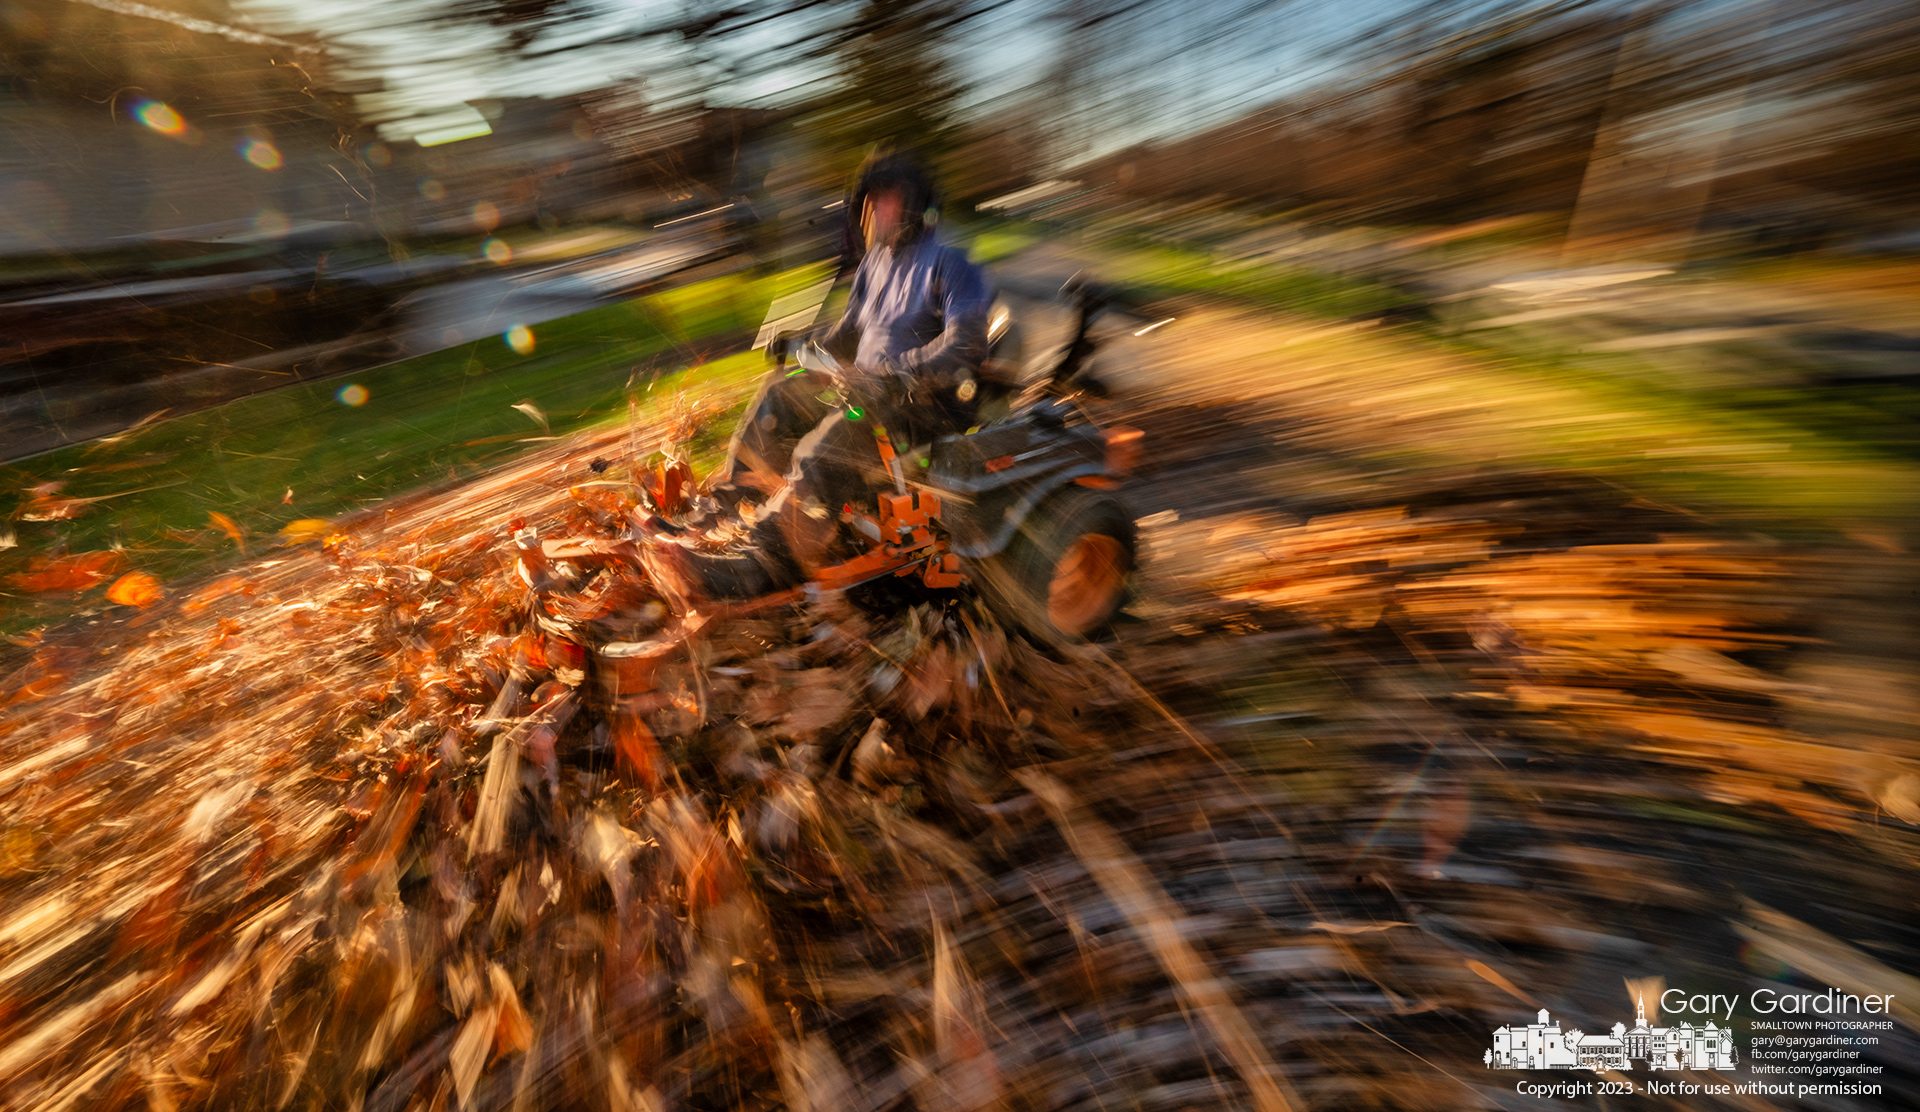 A landscaper uses a large lawnmower with its deck lowered to move thick piles of leaves off grass and sidewalk along Maxtown Road to a collection point for removal. My Final Photo for November 29, 2023.